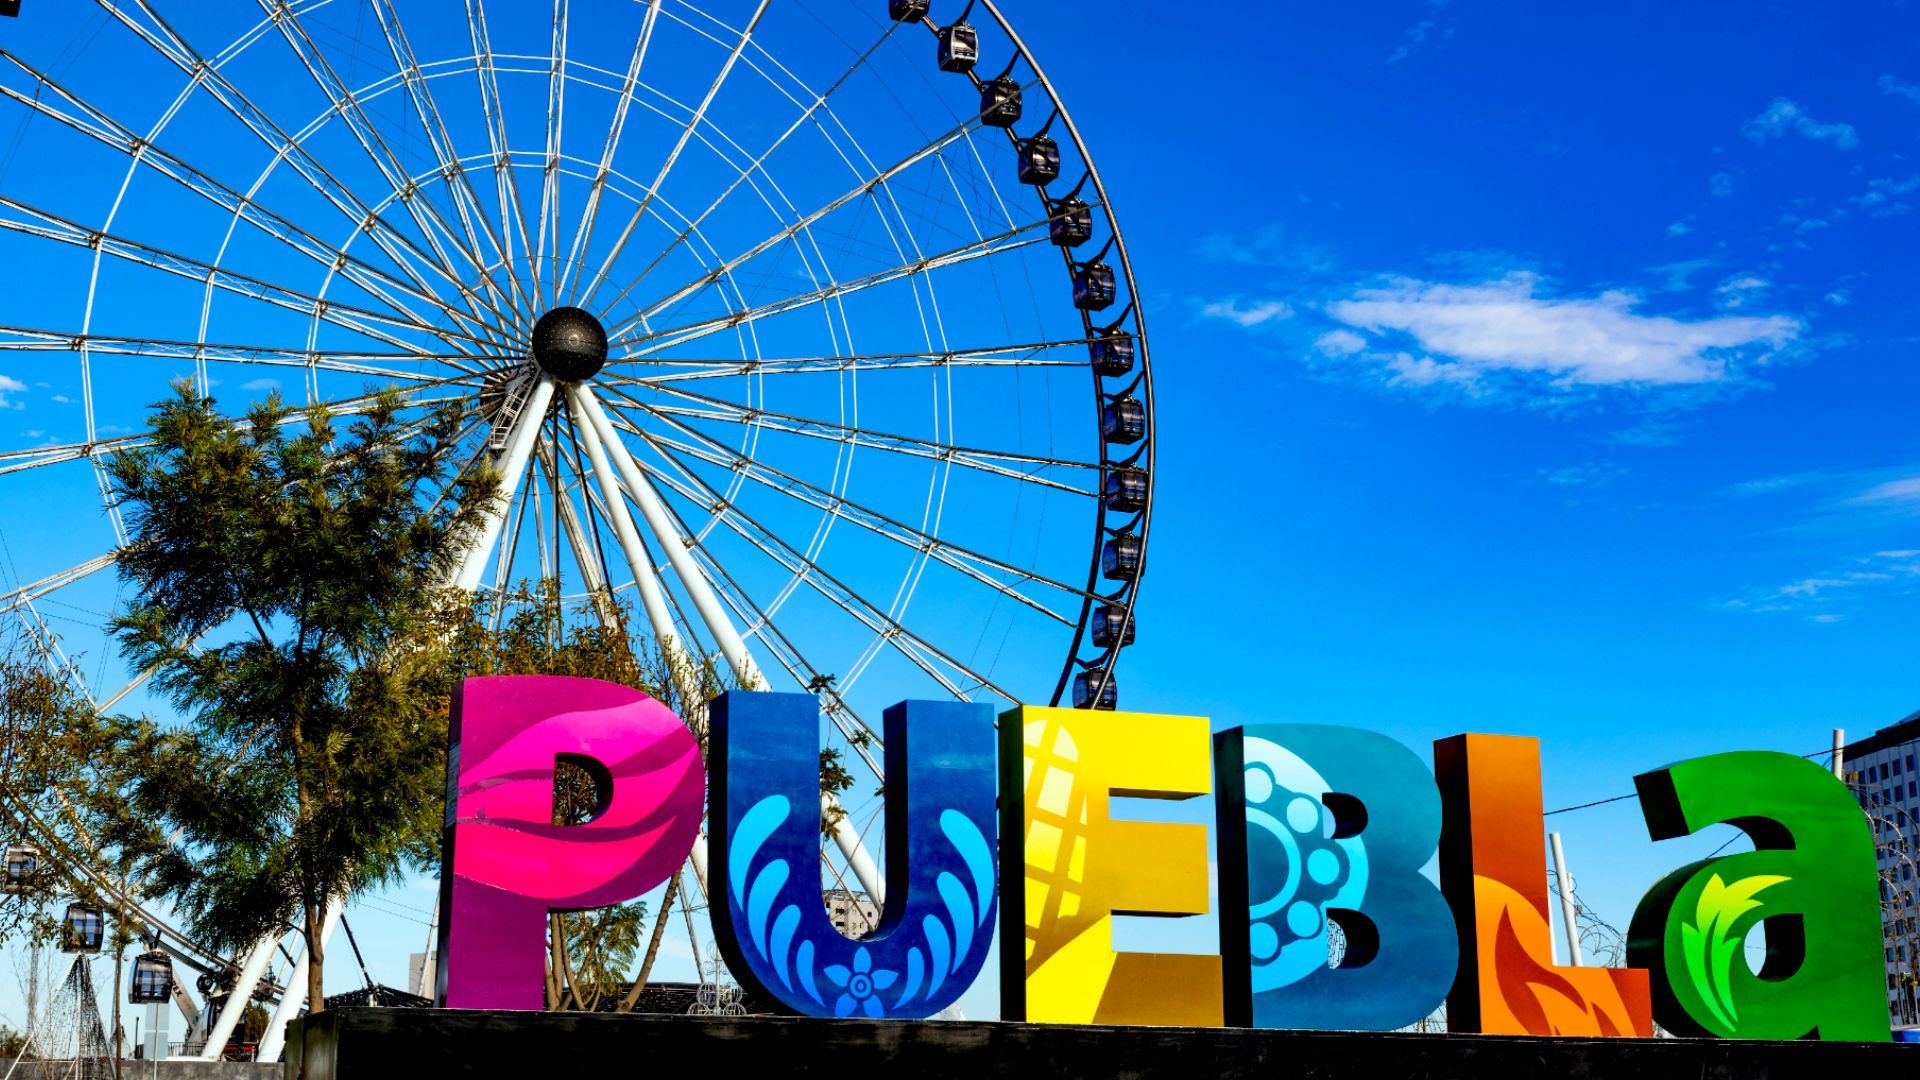 a colorful sign for puebla with a ferris wheel in the background for the start of the Puebla State Fair